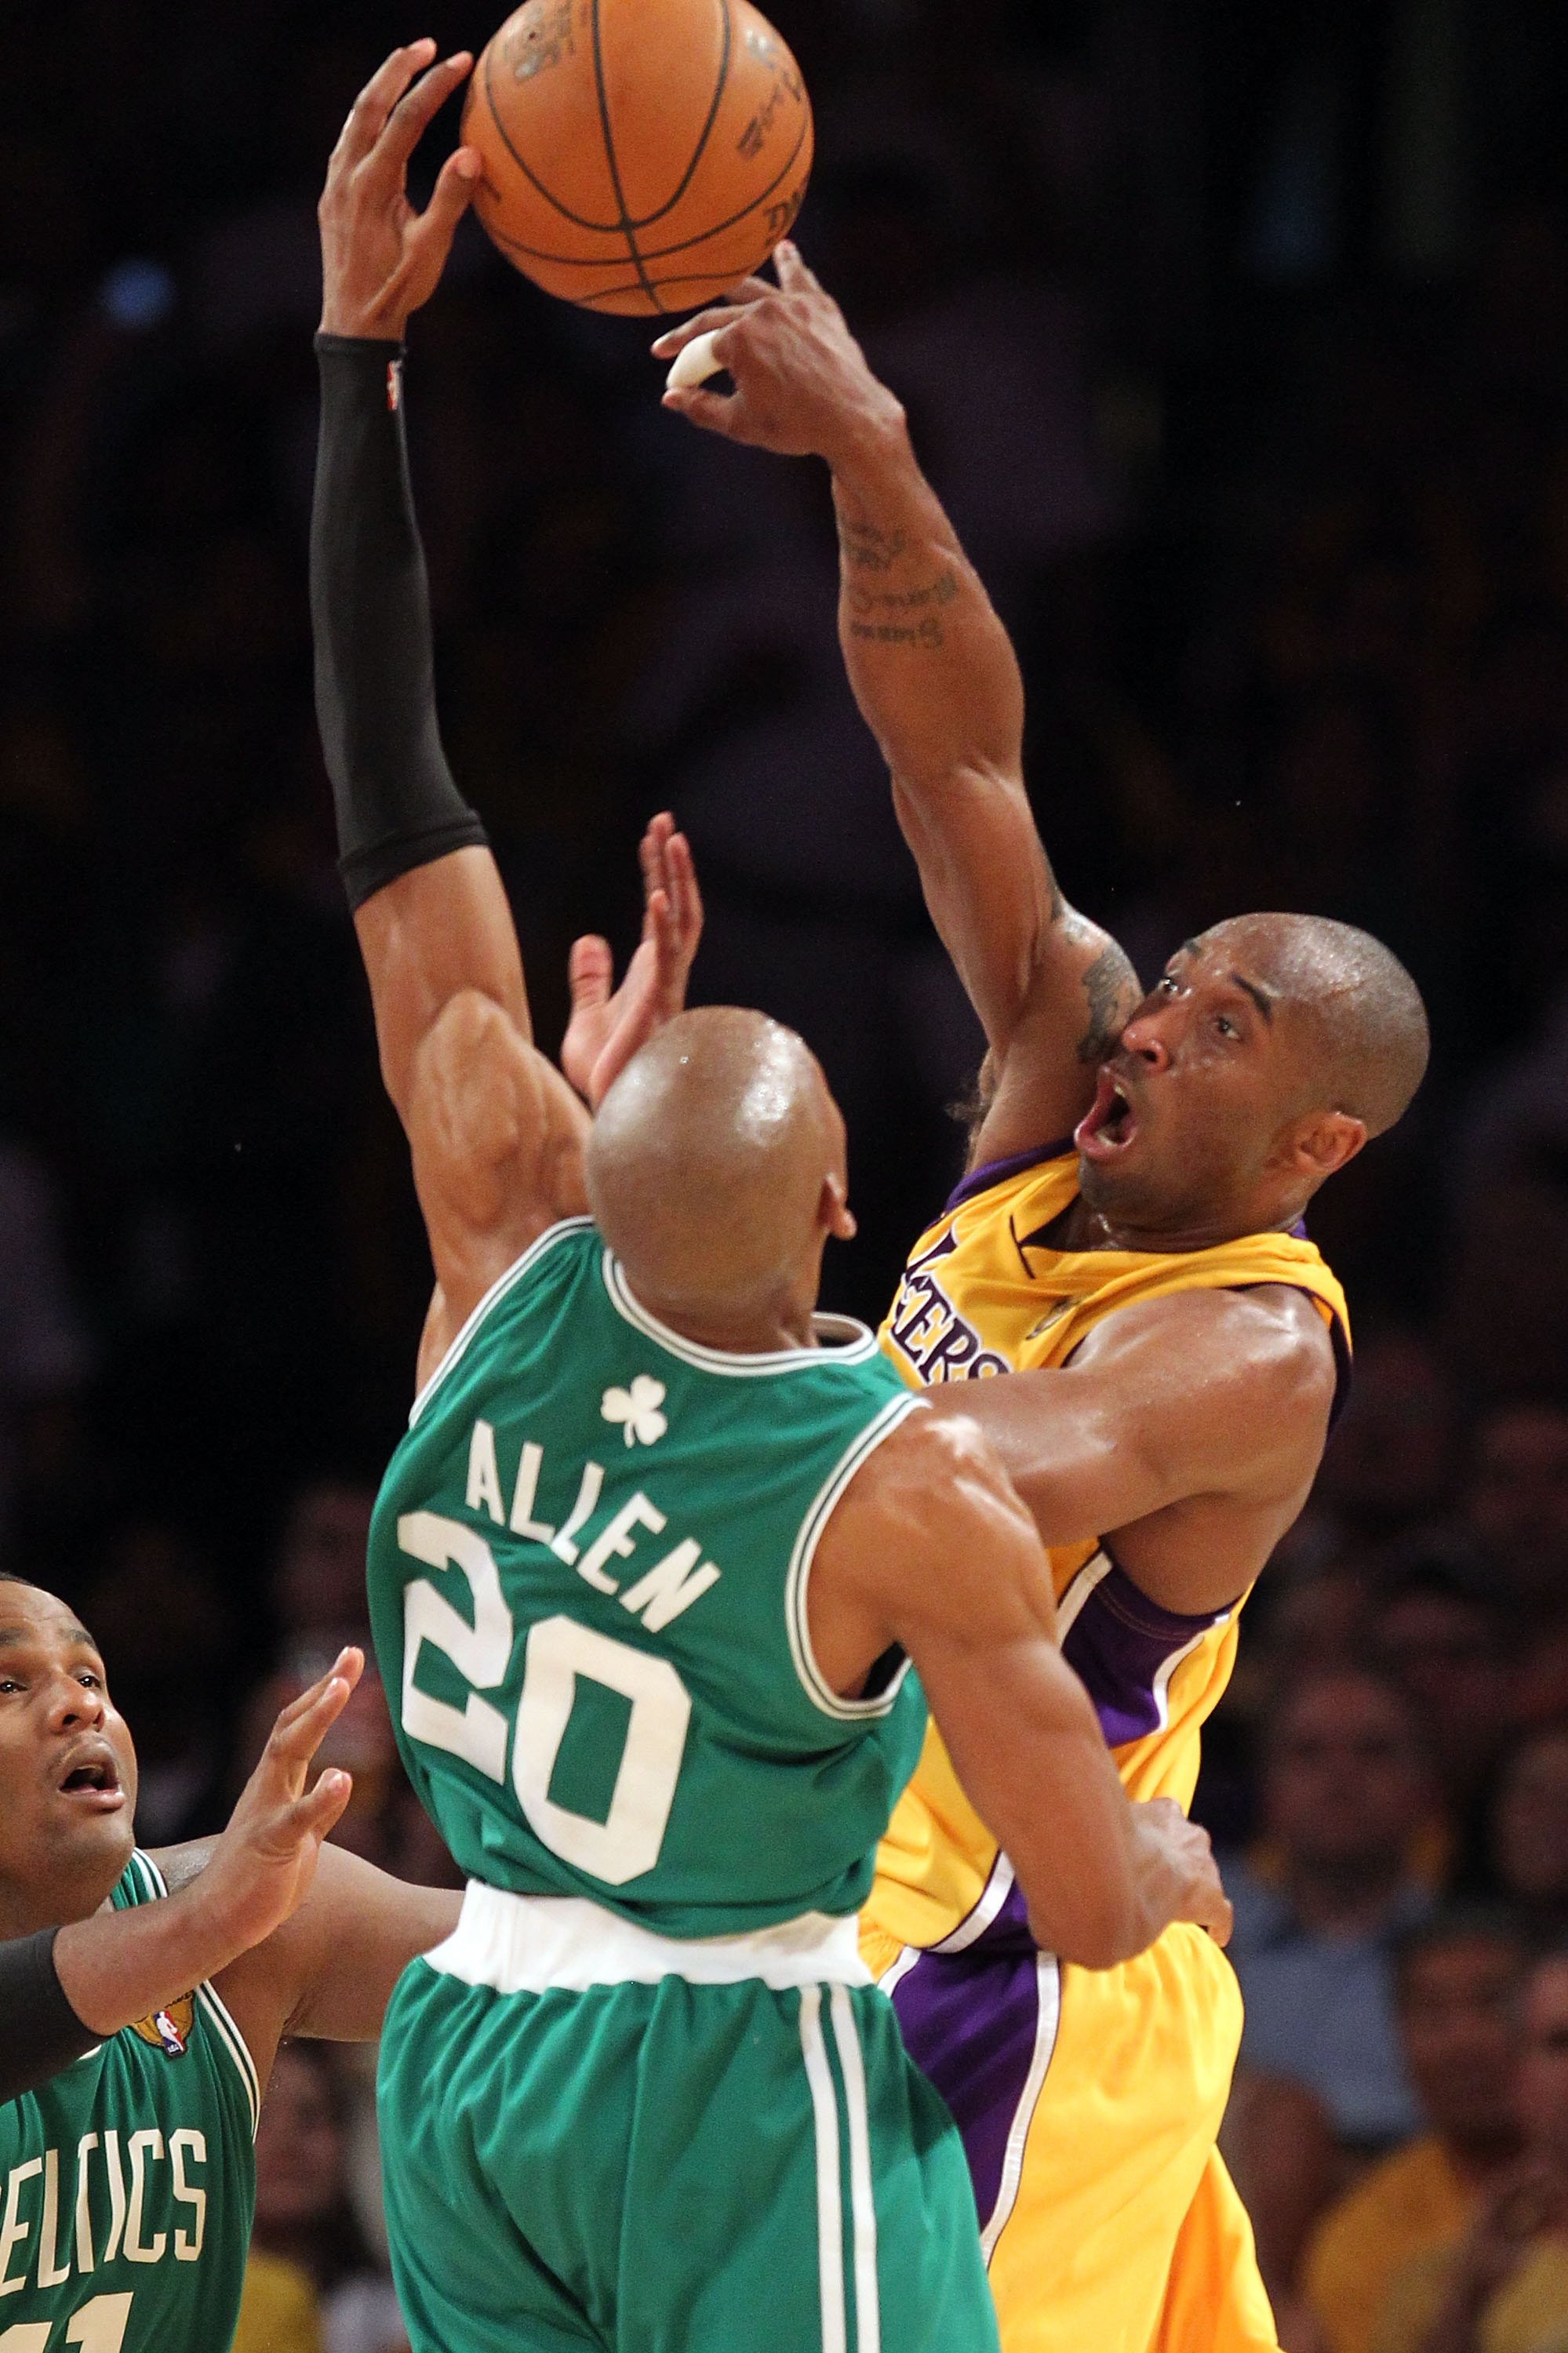 LOS ANGELES, CA - JUNE 17:  Kobe Bryant #24 of the Los Angeles Lakers moves the ball over Ray Allen #20 of the Boston Celtics in Game Seven of the 2010 NBA Finals at Staples Center on June 17, 2010 in Los Angeles, California.  NOTE TO USER: User expressly